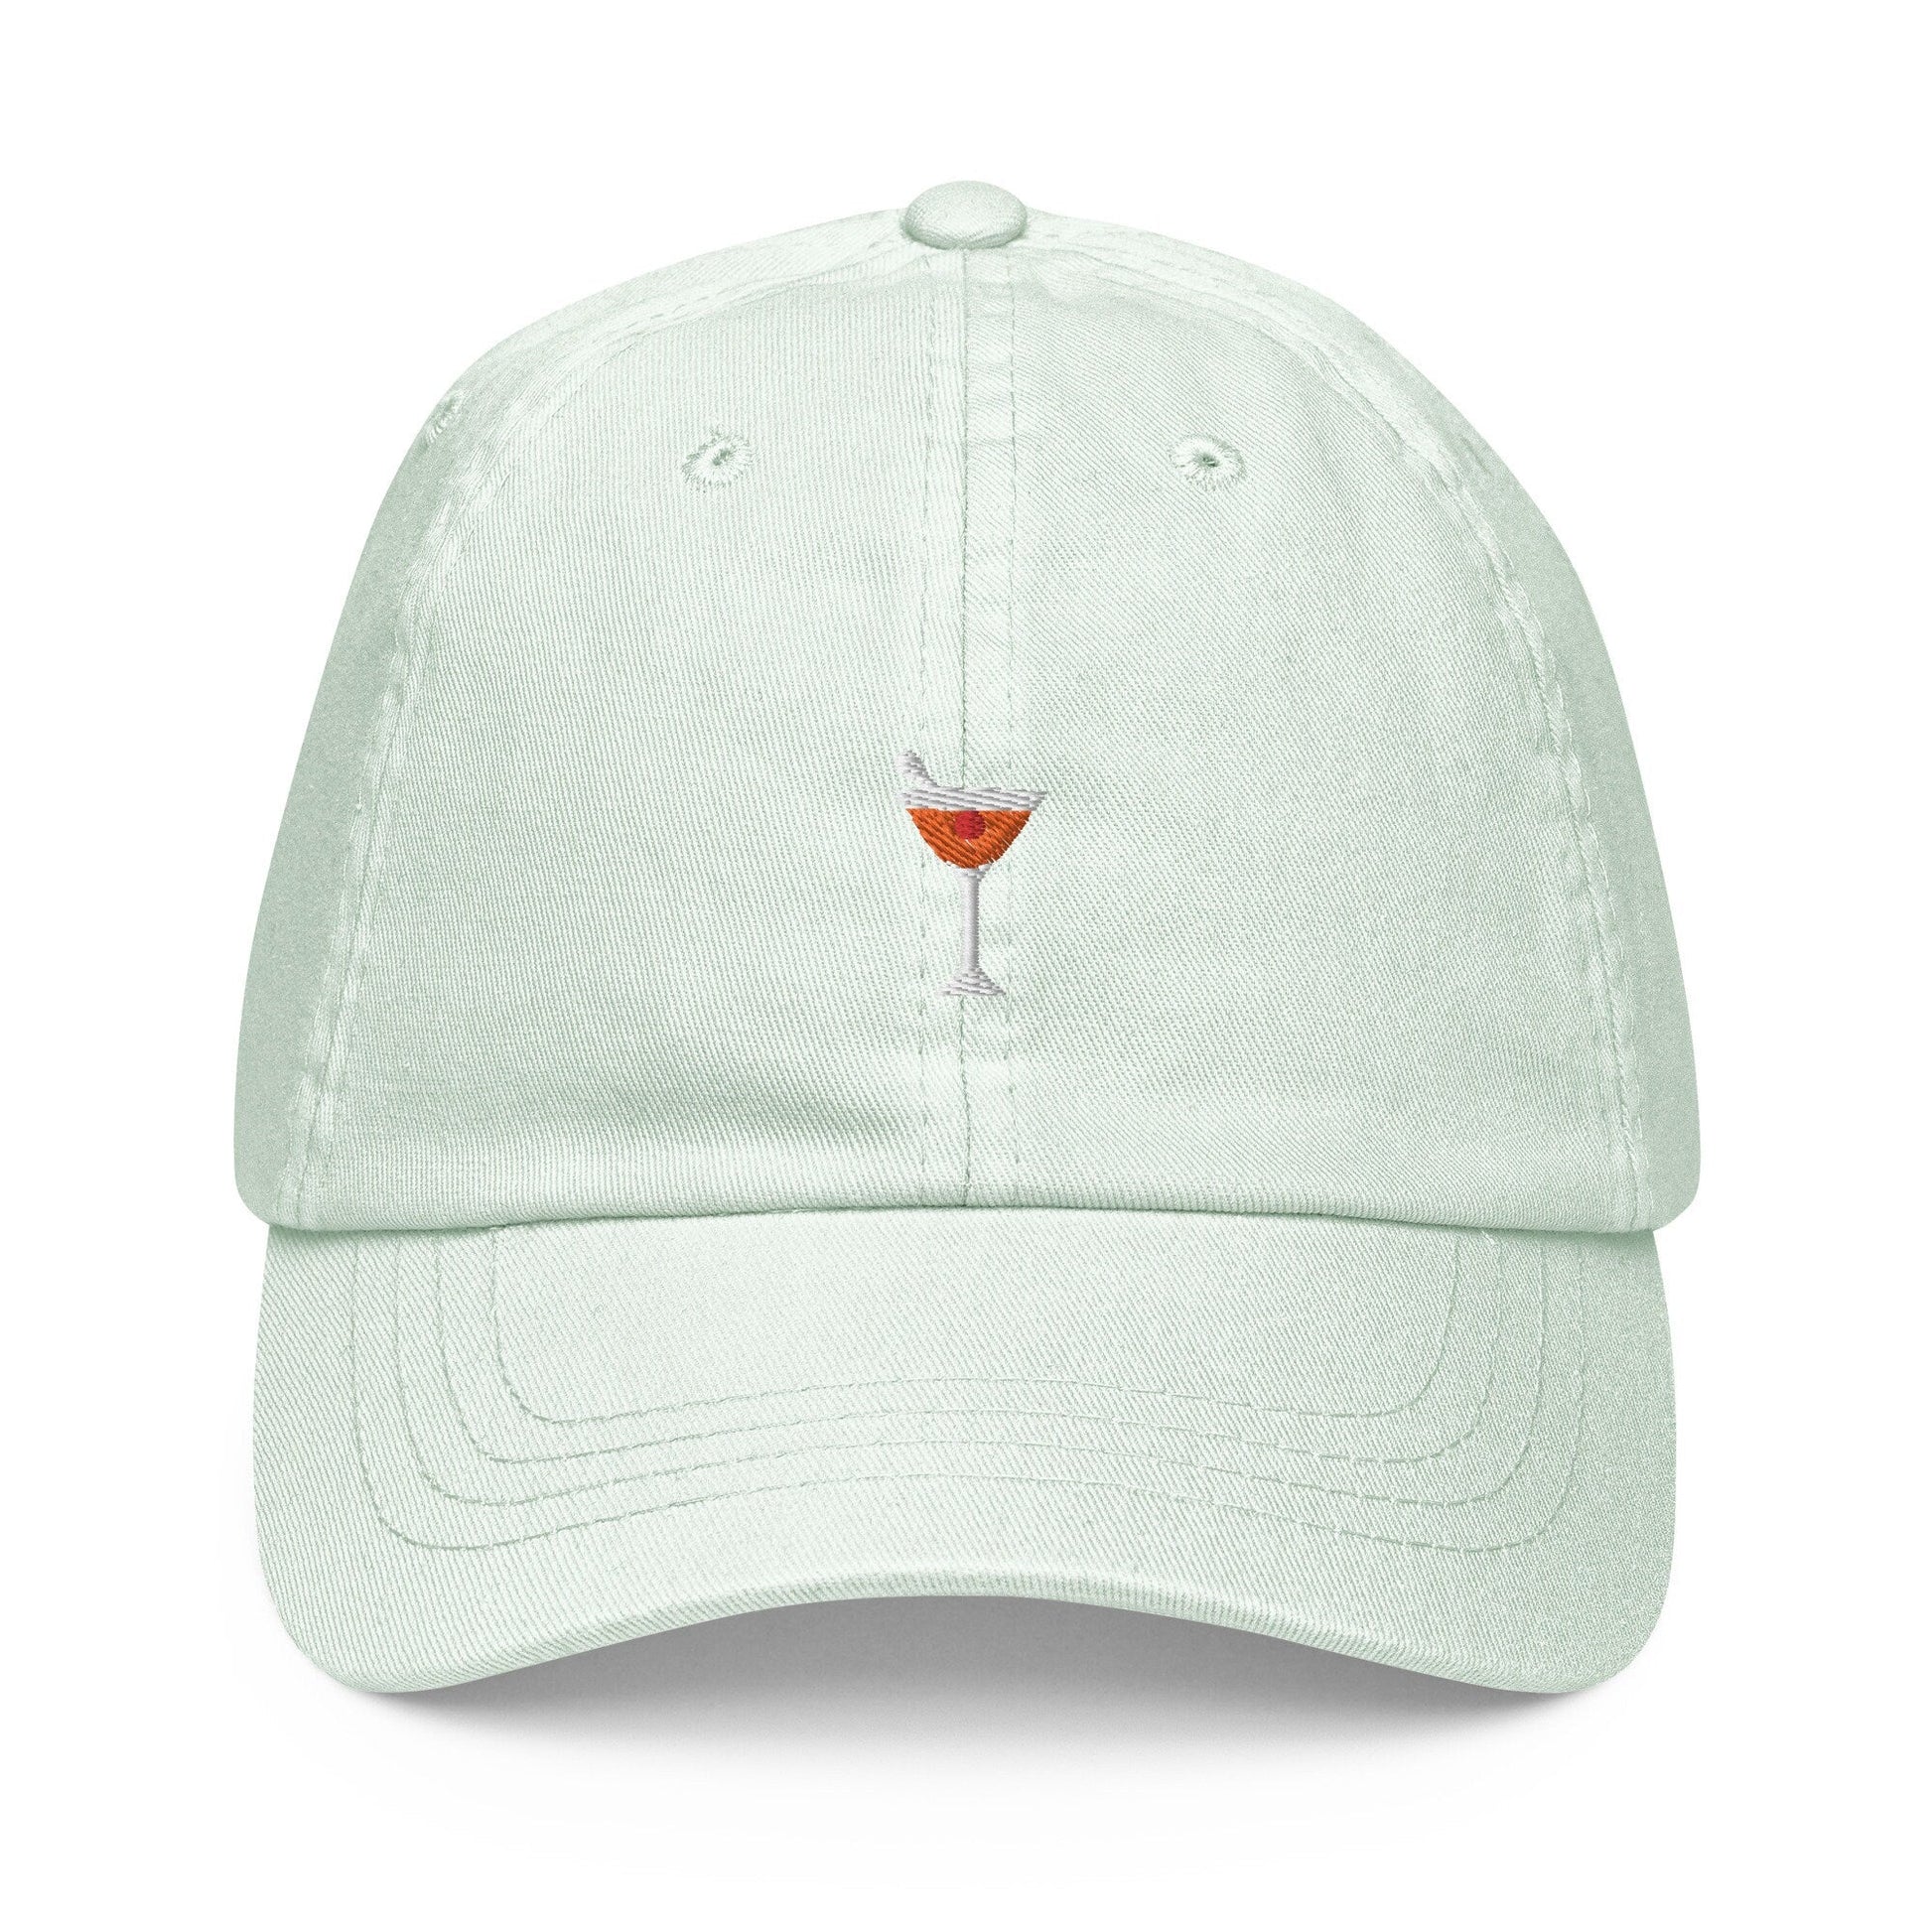 Manhattan Dad Hat - Gift for whisky cherry vermouth cocktail lovers - Embroidered Cotton Cap - Evilwater Originals